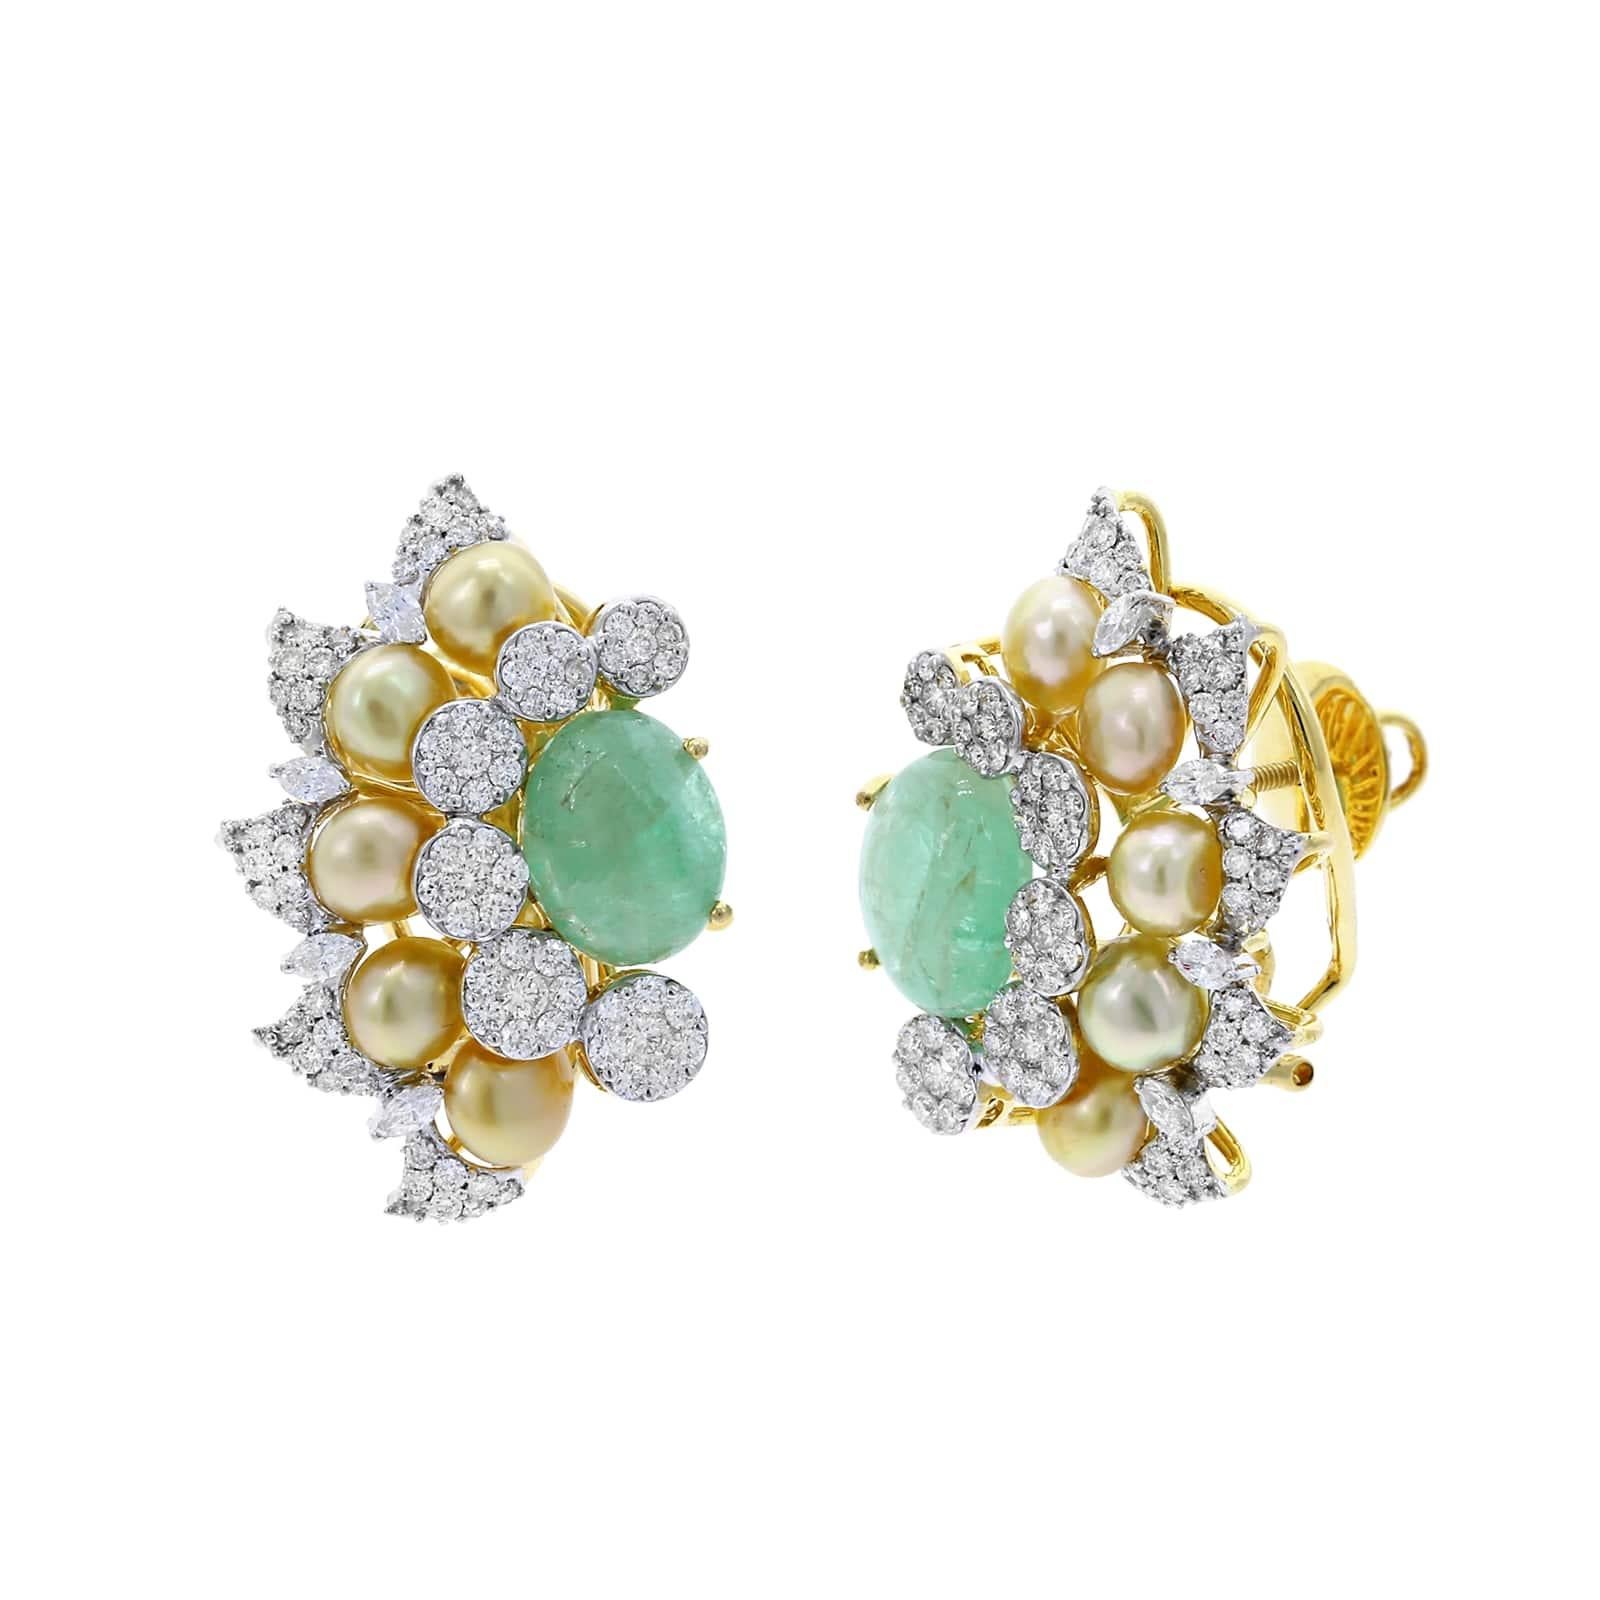 A semi-circle fan-like design of earrings with Emeralds, Pearls, and Diamonds. Total Diamond Weight: Round (2 cts.), Marquise (0.39 cts.) , and Emerald 19.02 cts). 18K Gold.